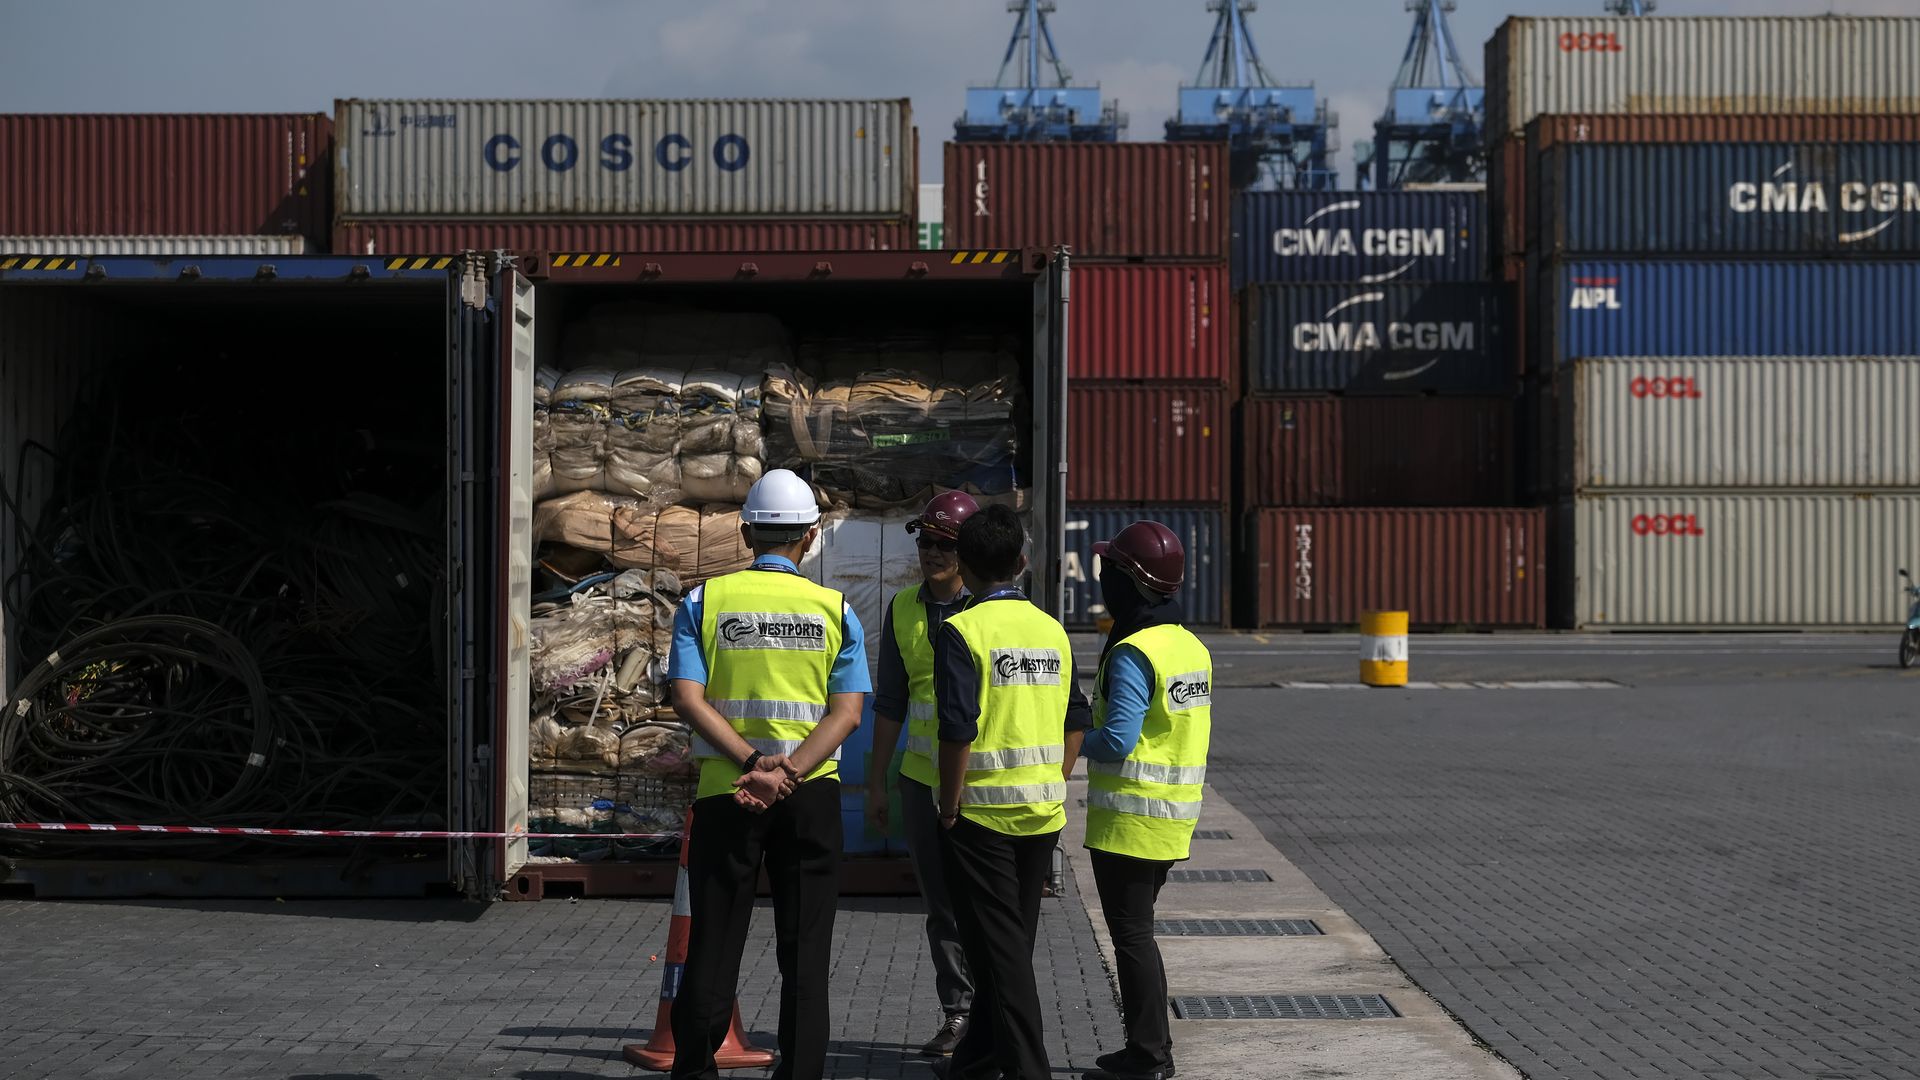 Workers in front of containers filled with plastic waste at a port in Selangor, Malaysia in May 2019.